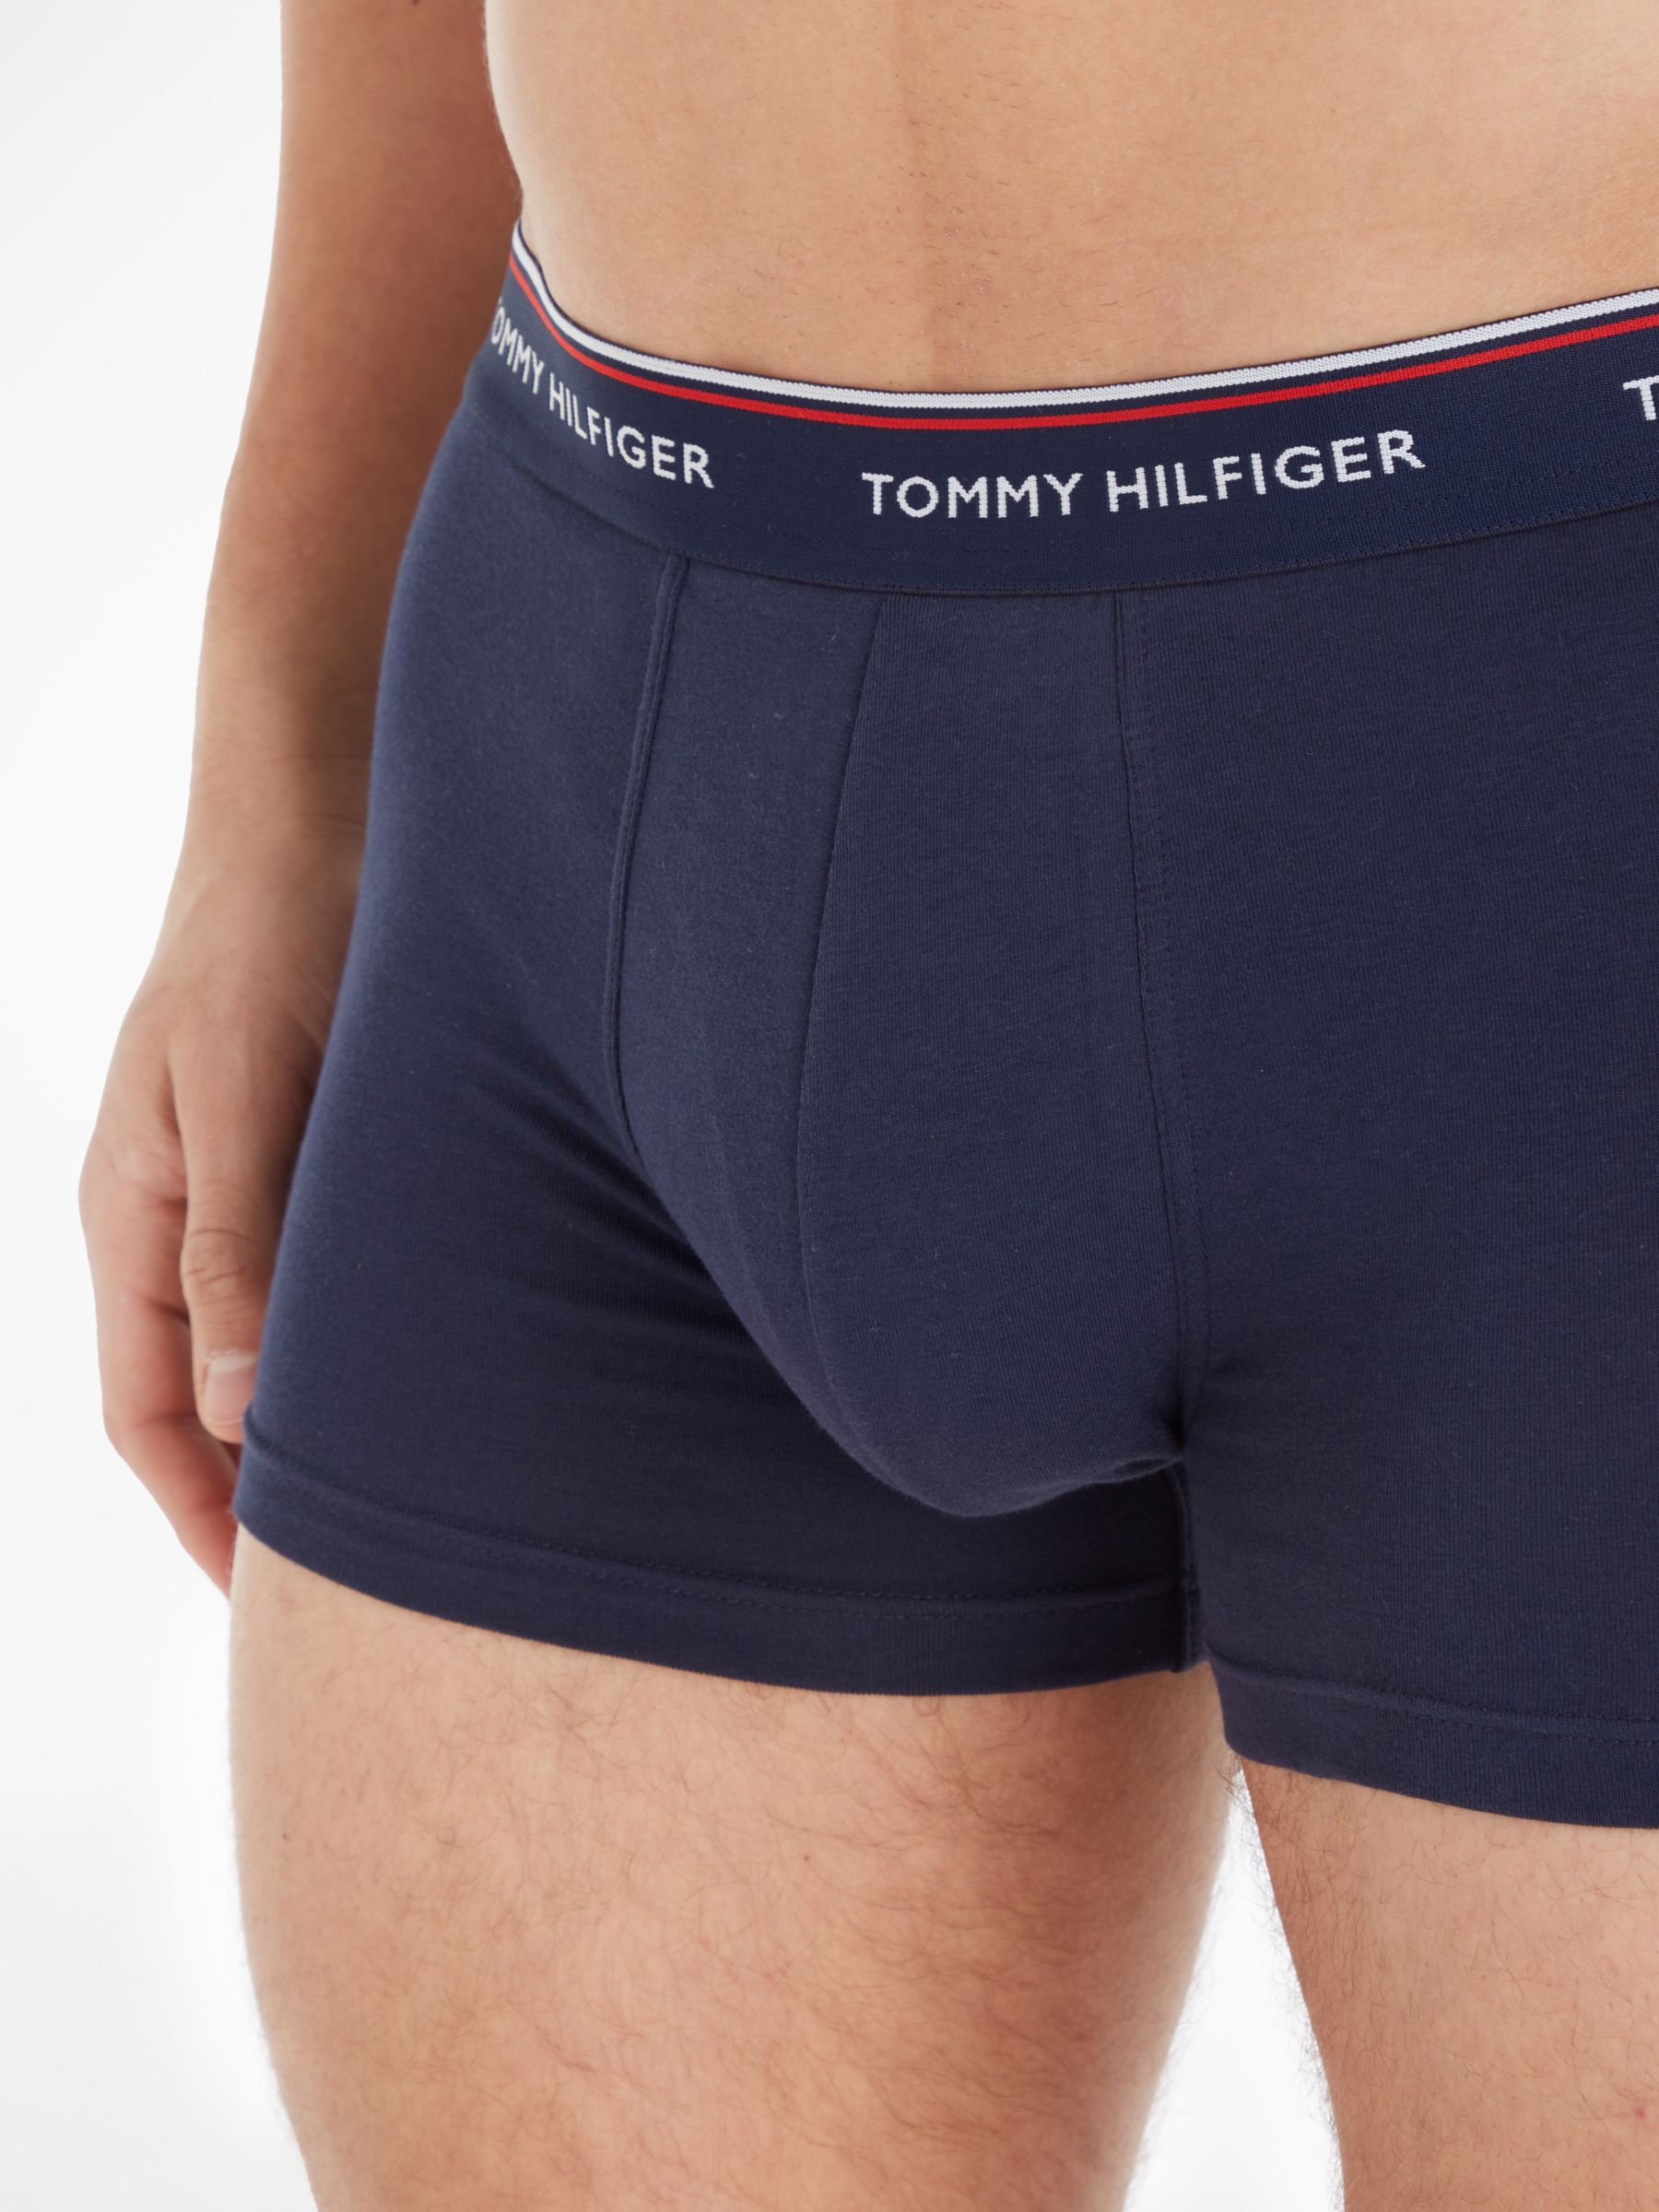 Tommy Hilfiger Cotton Jersey Trunks, Pack of 3, Multi/Peacoat, L